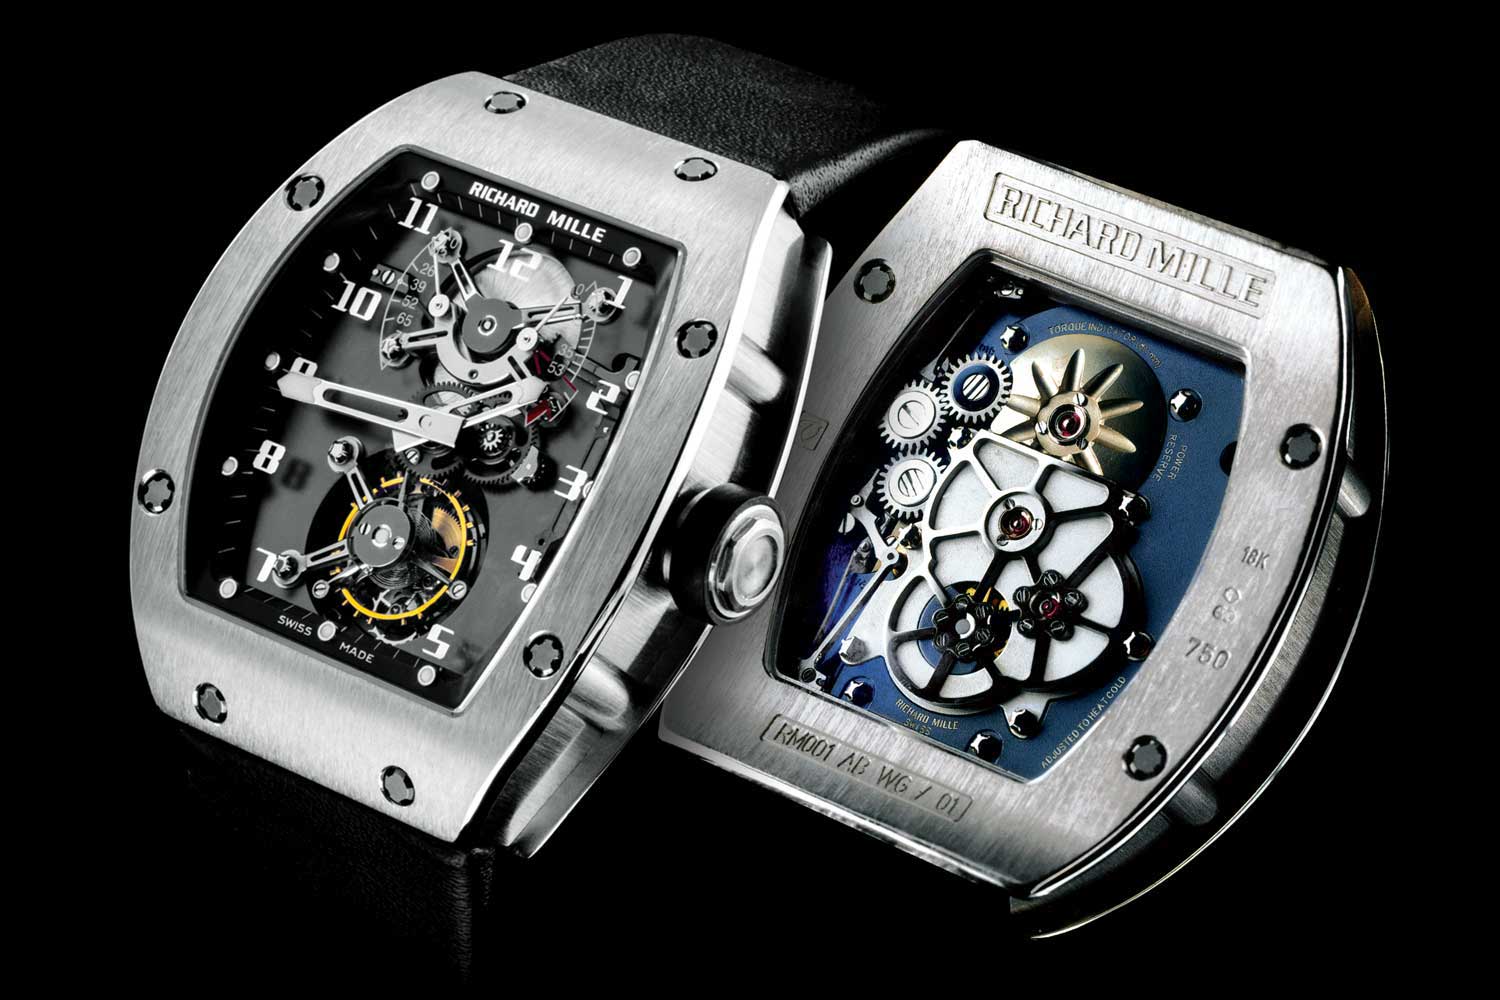 When introduced in 2001, the RM 001 presented a technical and aesthetic approach that was earth shattering in the watchmaking industry